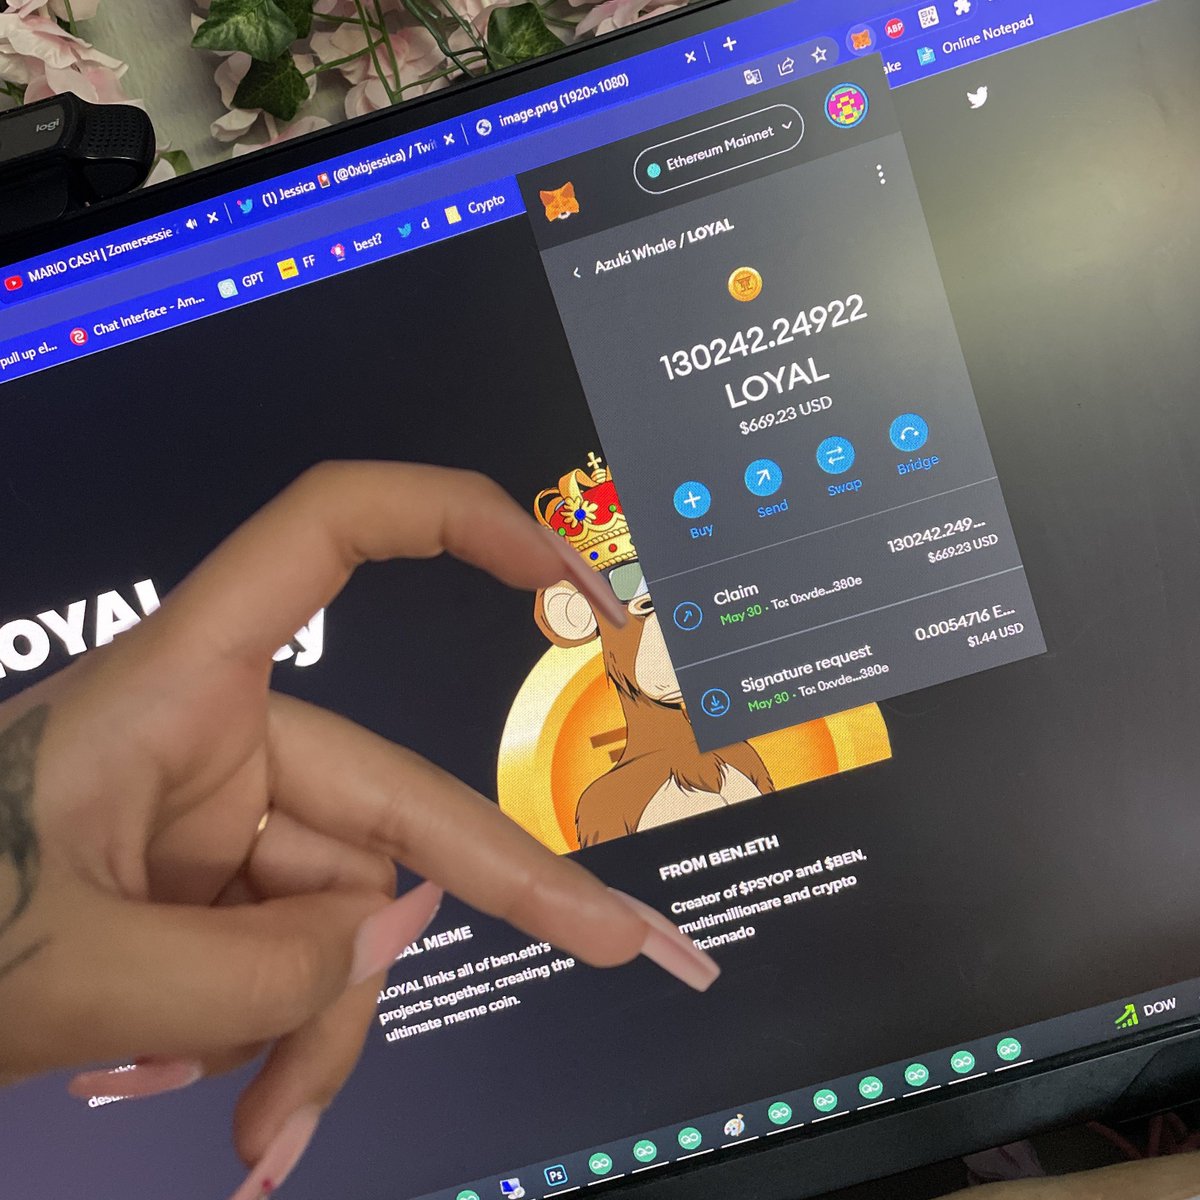 omg i just claimed $670 from the $LOYAL airdrop? claim now 👇

🔗 loyal.gs 🎁

$ADA #crypto #100X #MATIC BTC $SUI Ether #USDC $QNT #NFTs $XEN $APE #ETH #airdrops $LINK $DOGE $XRP $PEPE $MONG $BOB $WAGMI #MATIC $CAW $SHIB $FLOKI $DAVE $PSYOP $BEN #USDT $BTC Pauly